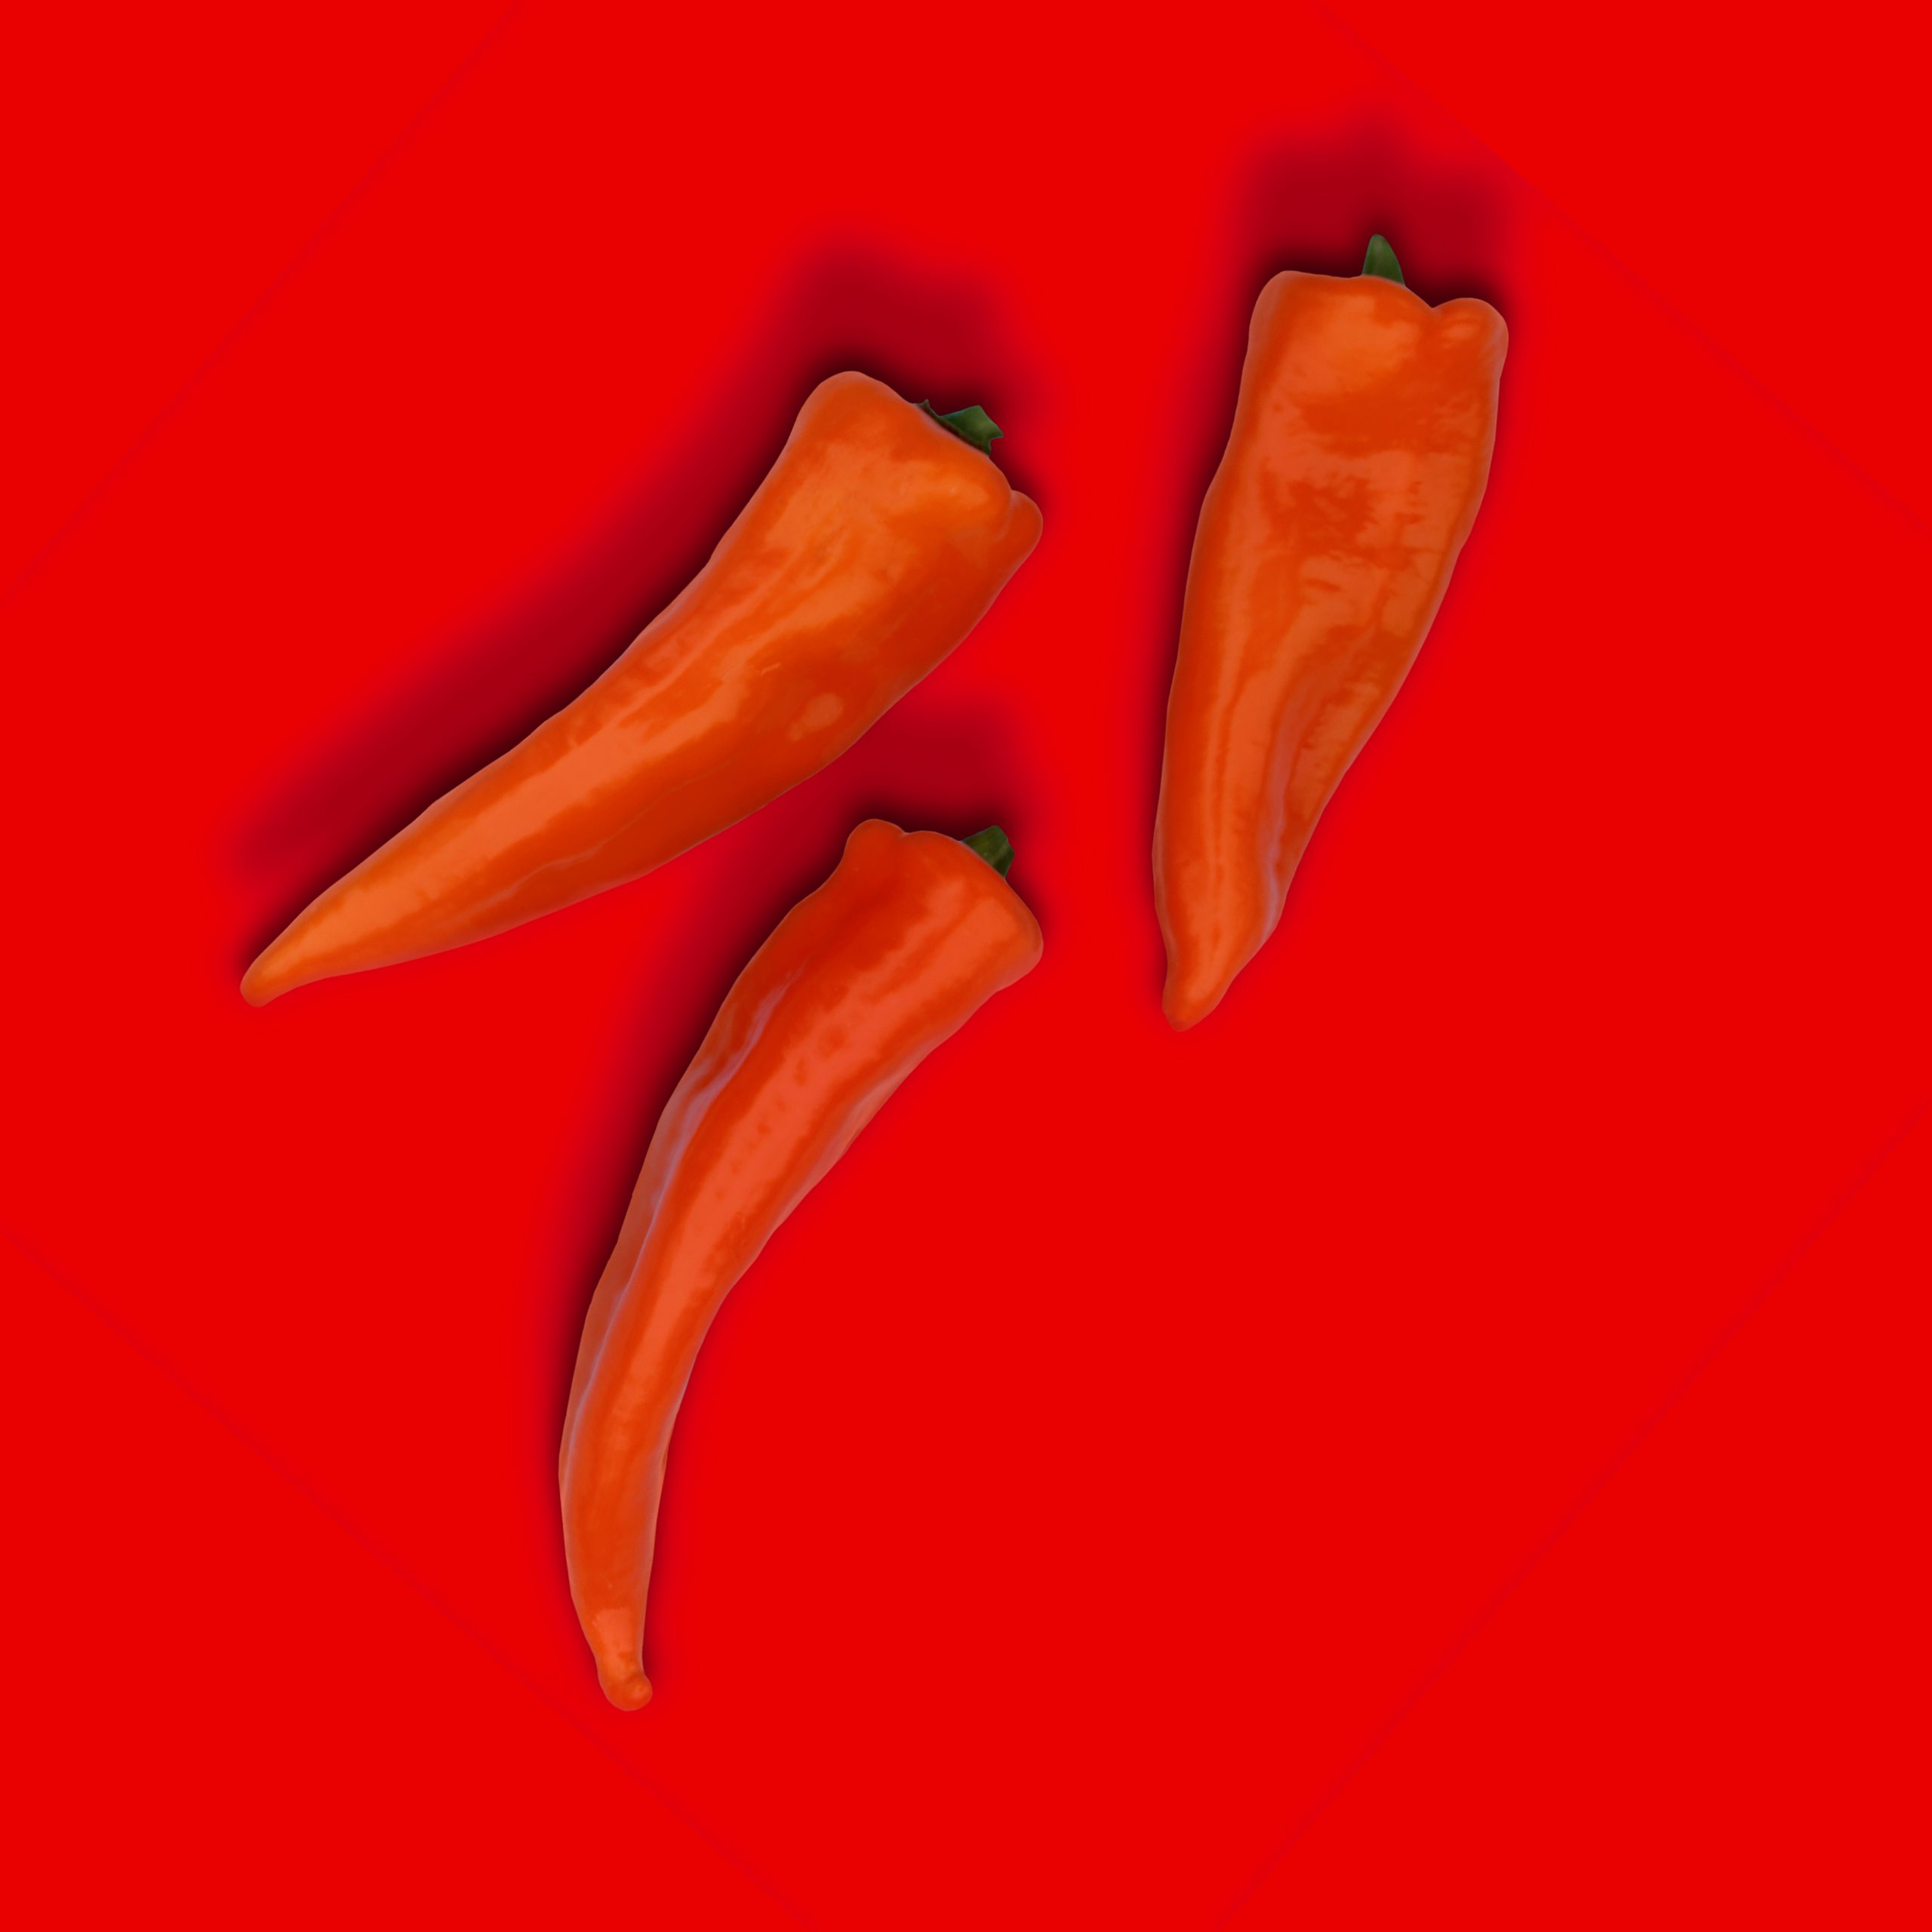 Red chili peppers of red background